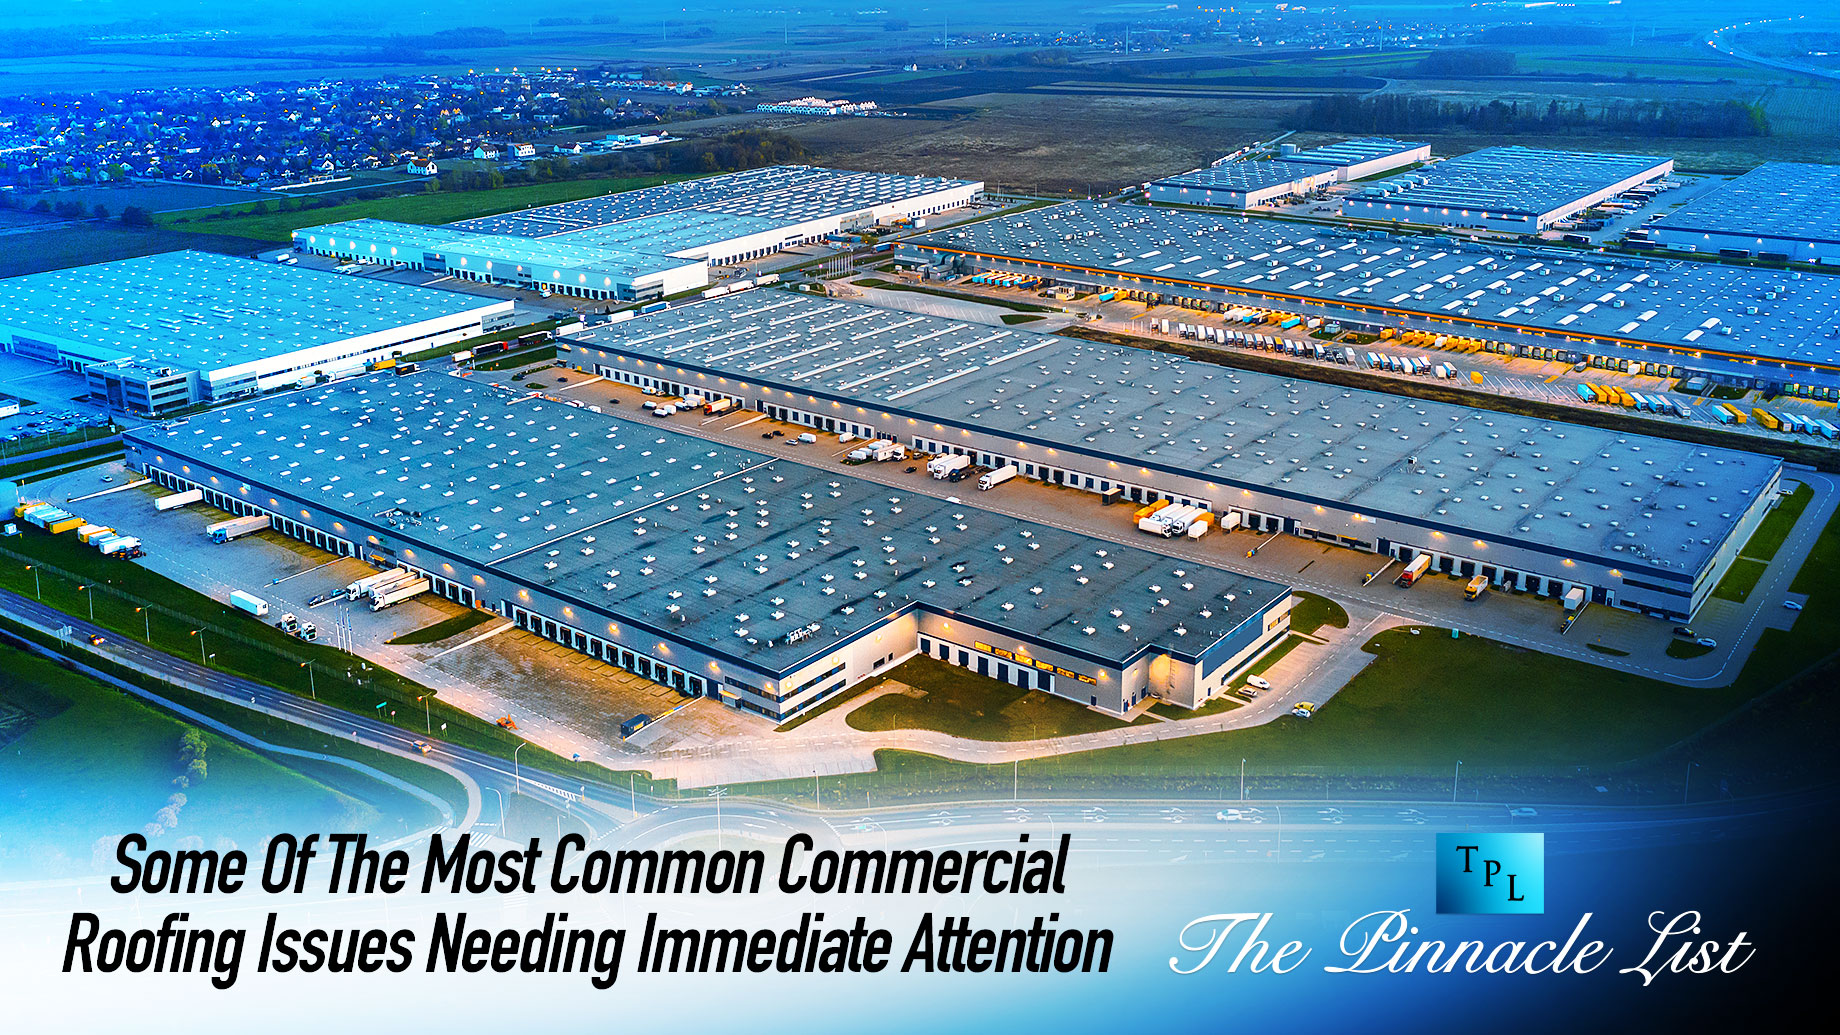 Some Of The Most Common Commercial Roofing Issues Needing Immediate Attention